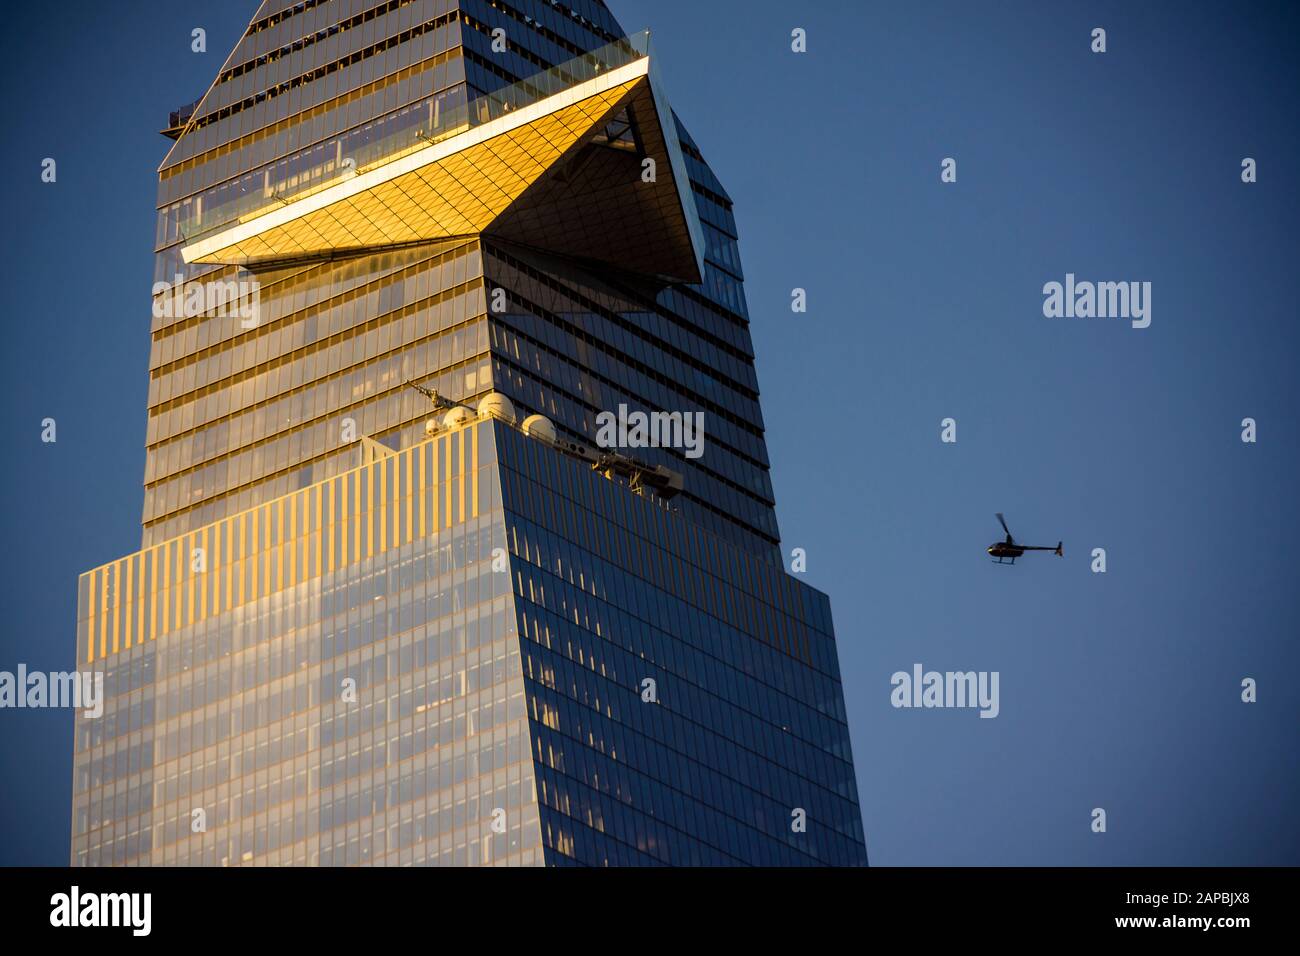 A helicopter flies past 30 Hudson Yards showing the cantilevered observation deck called 'The Edge', in New York on Wednesday, January 15, 2020 (© Richard B. Levine) Stock Photo